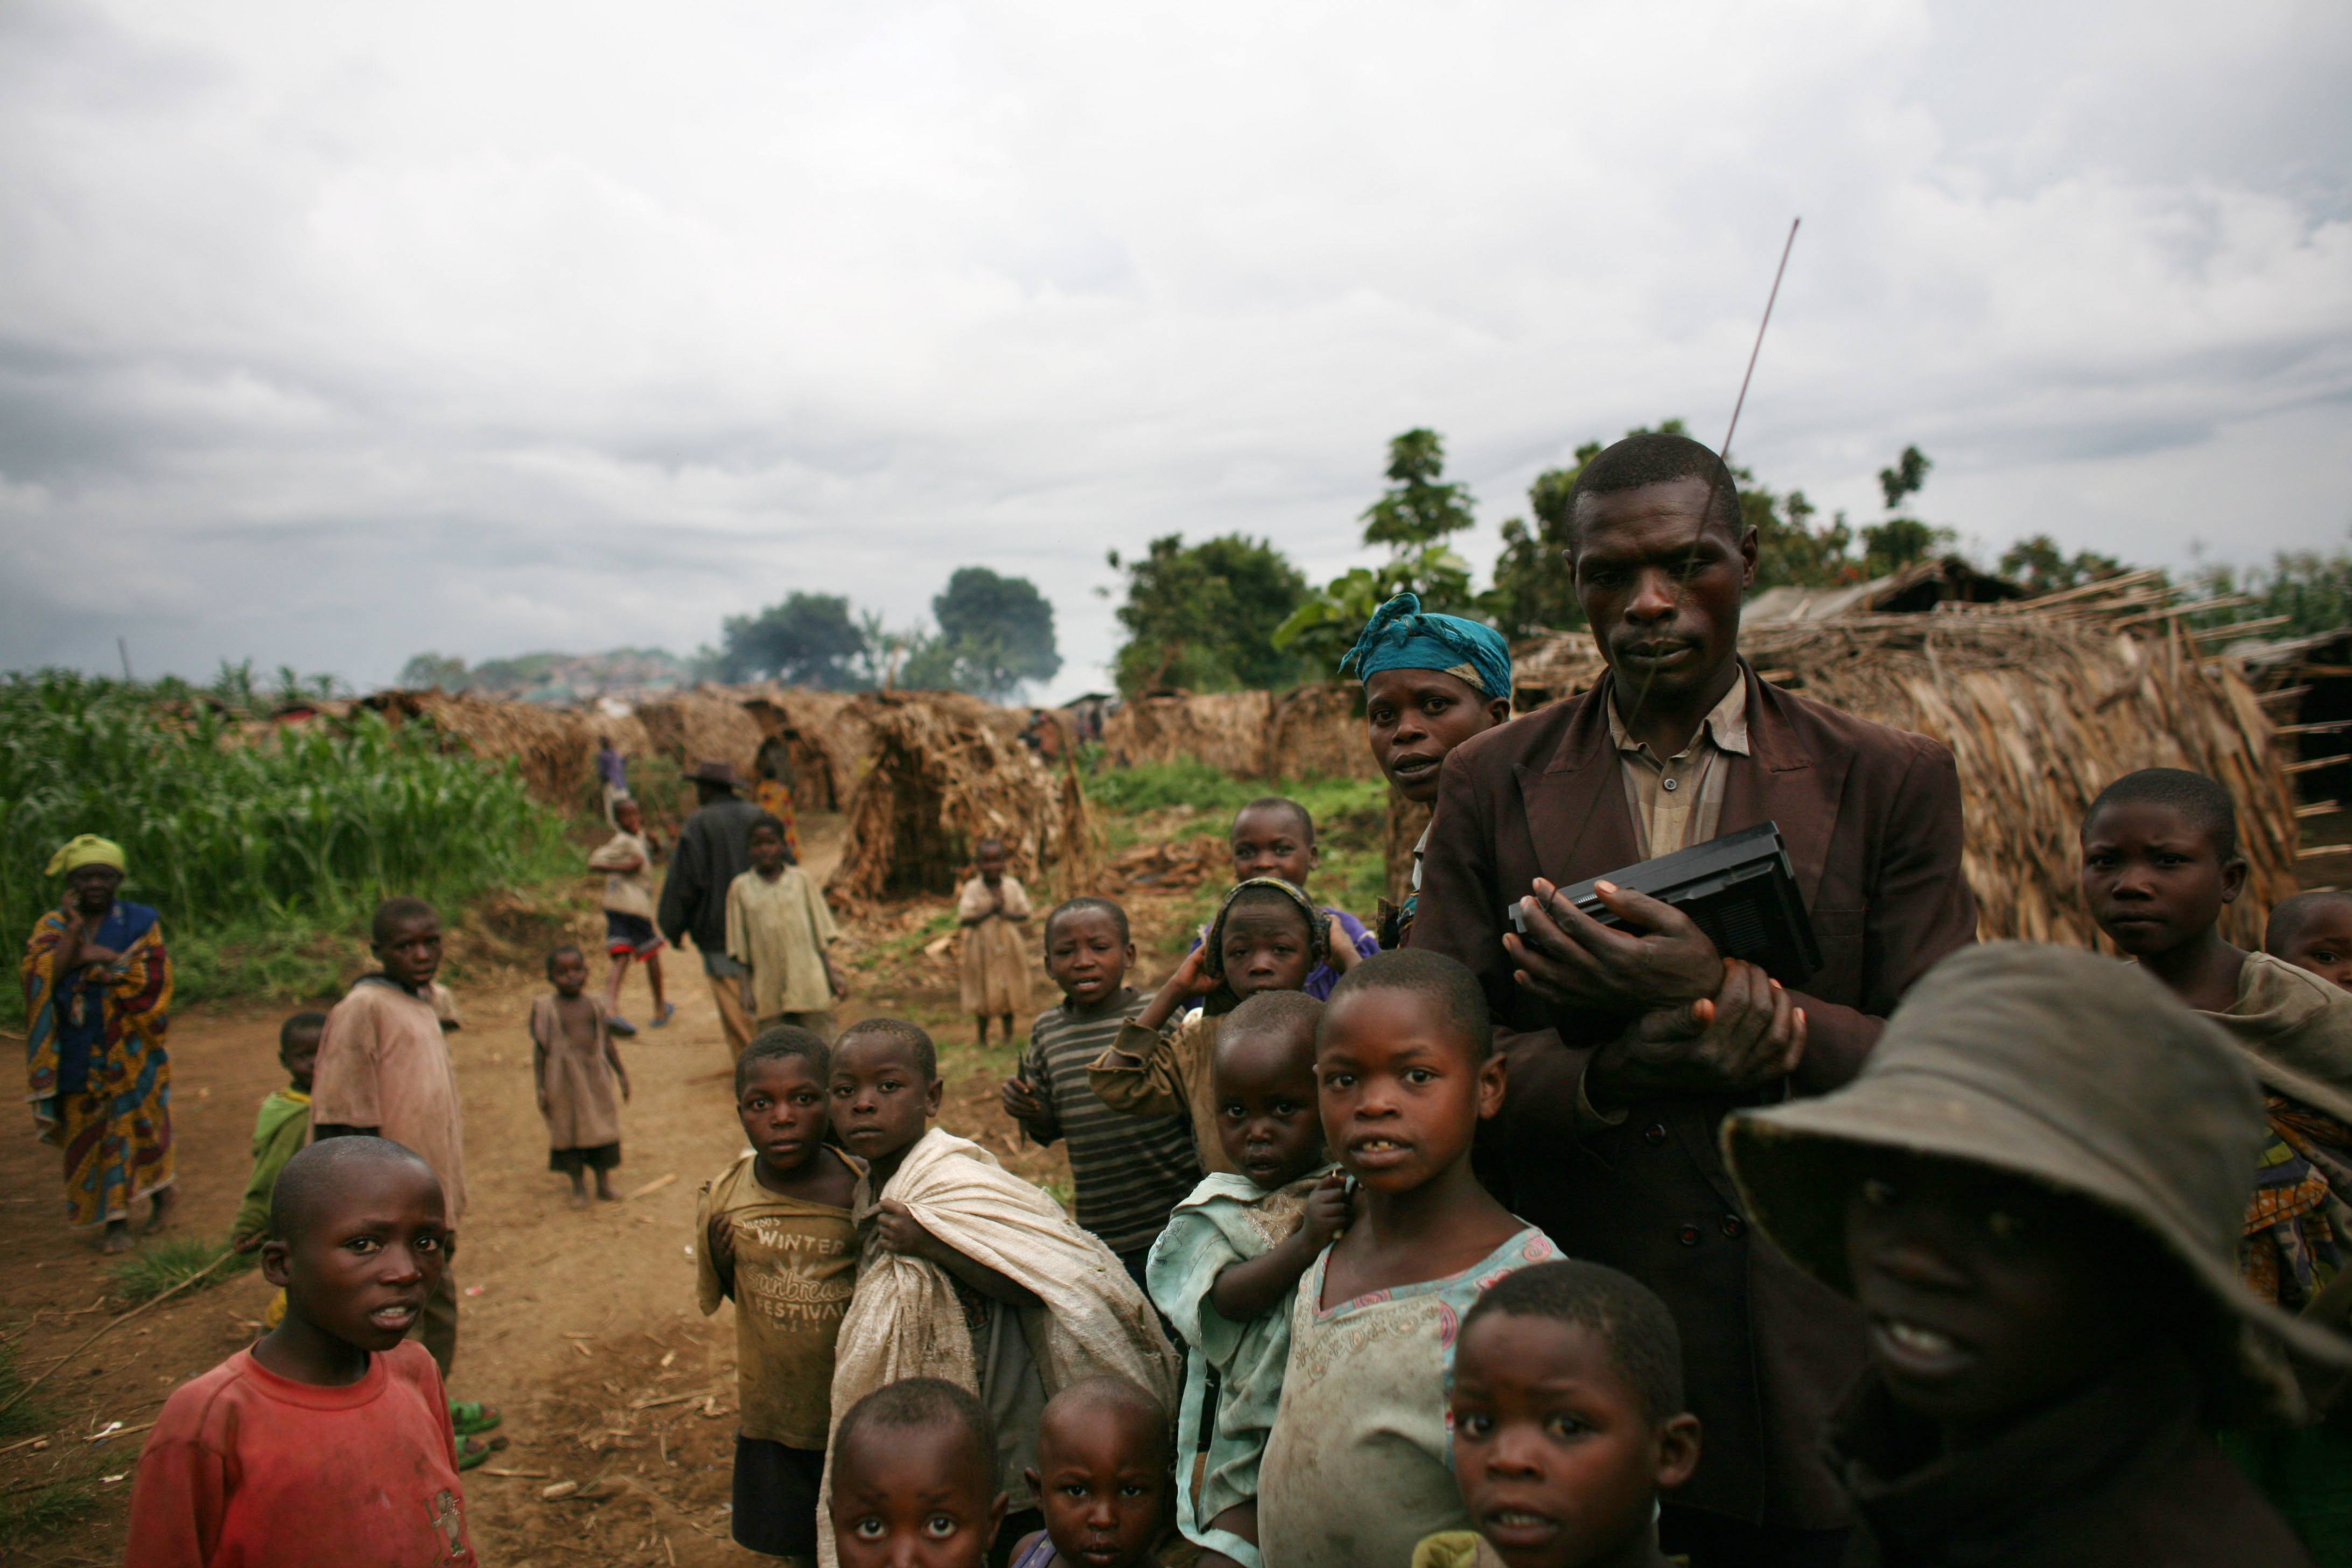 Refugees wait near their shelters in the Democratic Republic of the Congo